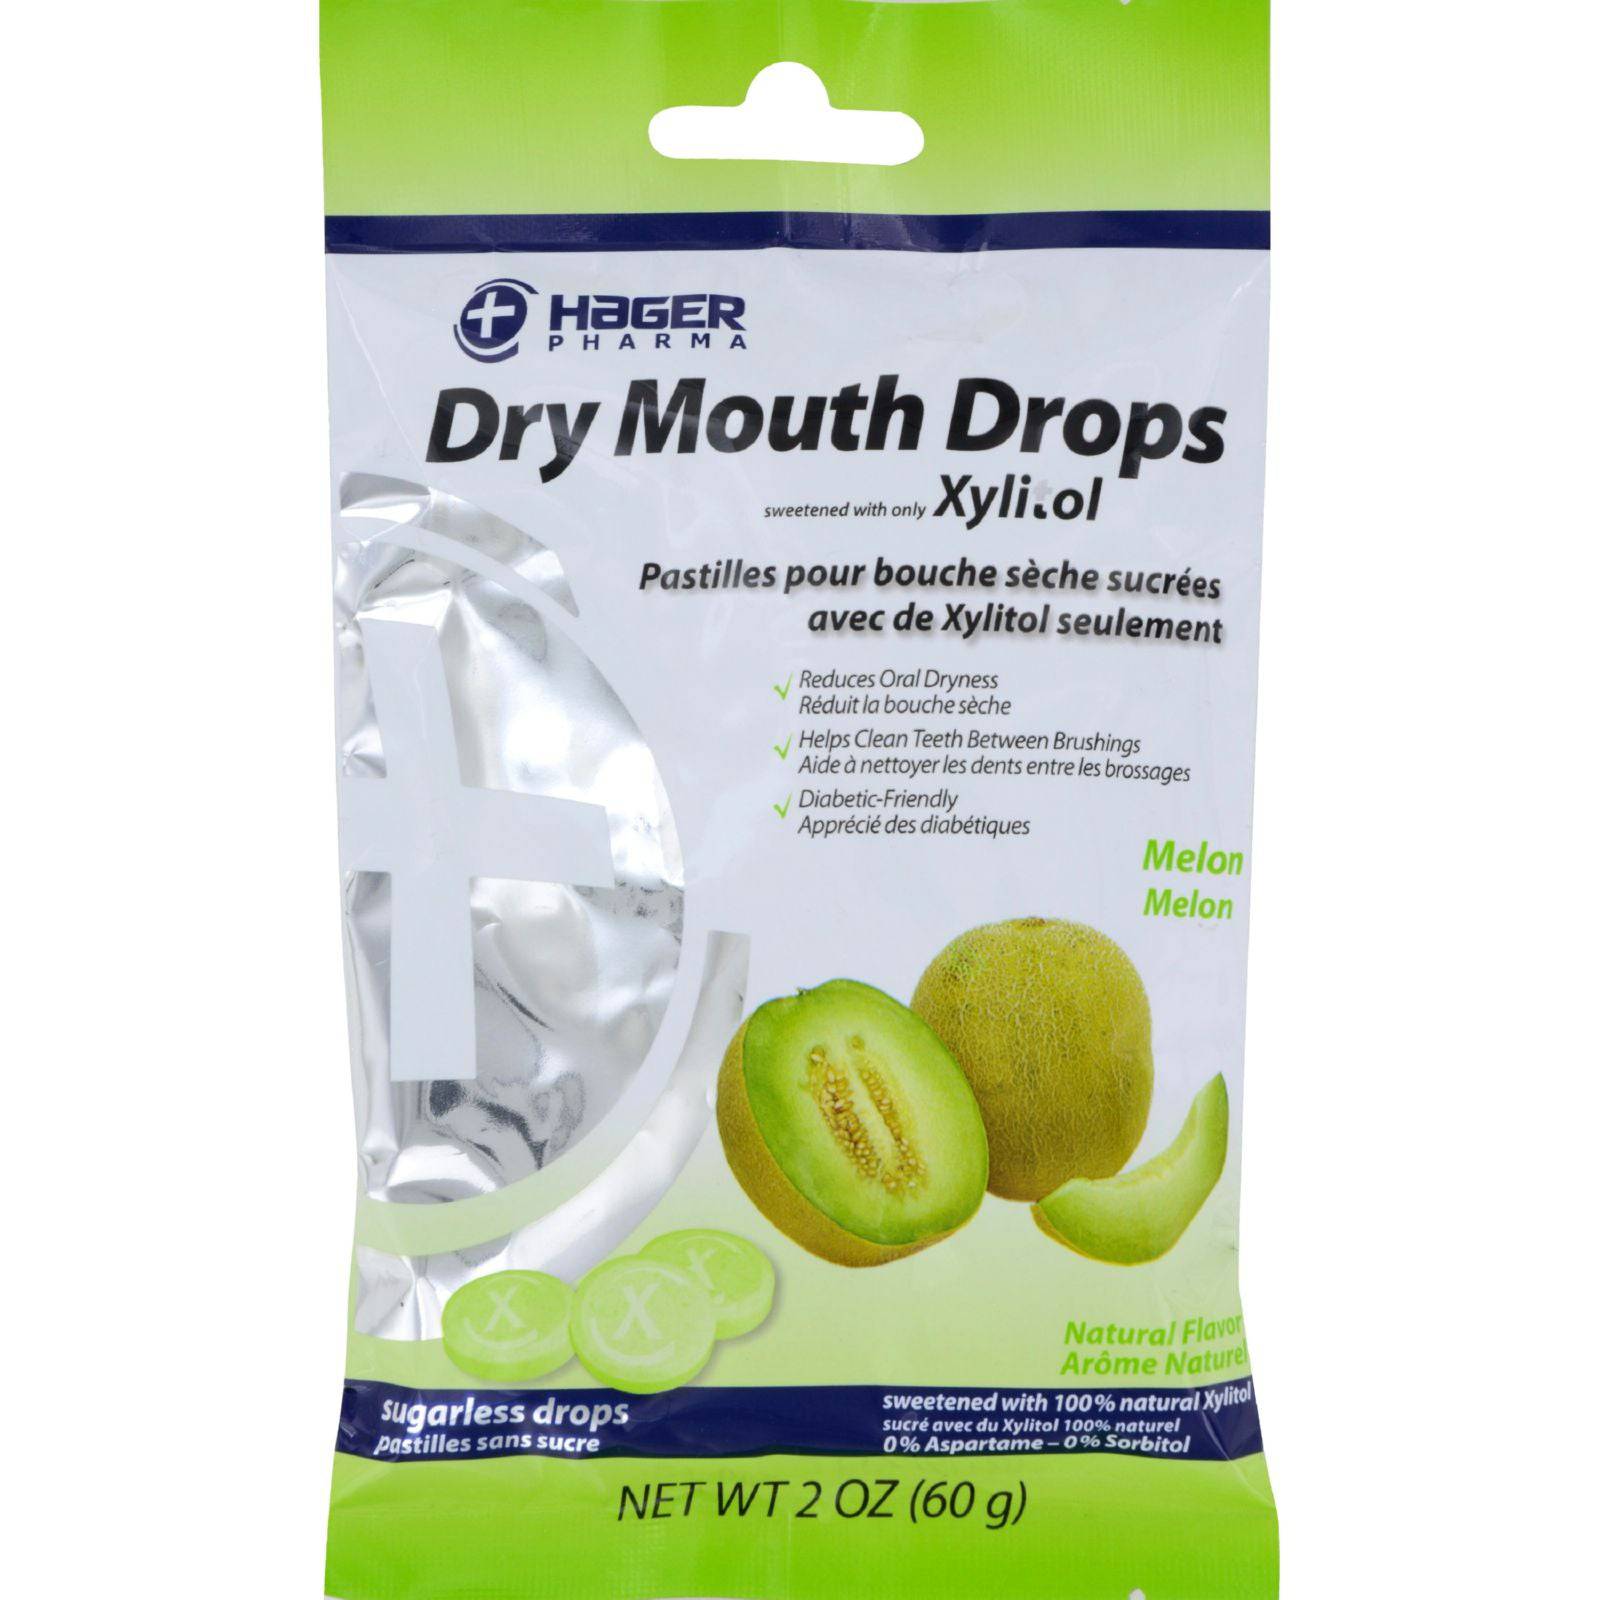 Hager Pharma Dry Mouth Drops - Melon - 2 Oz | OnlyNaturals.us